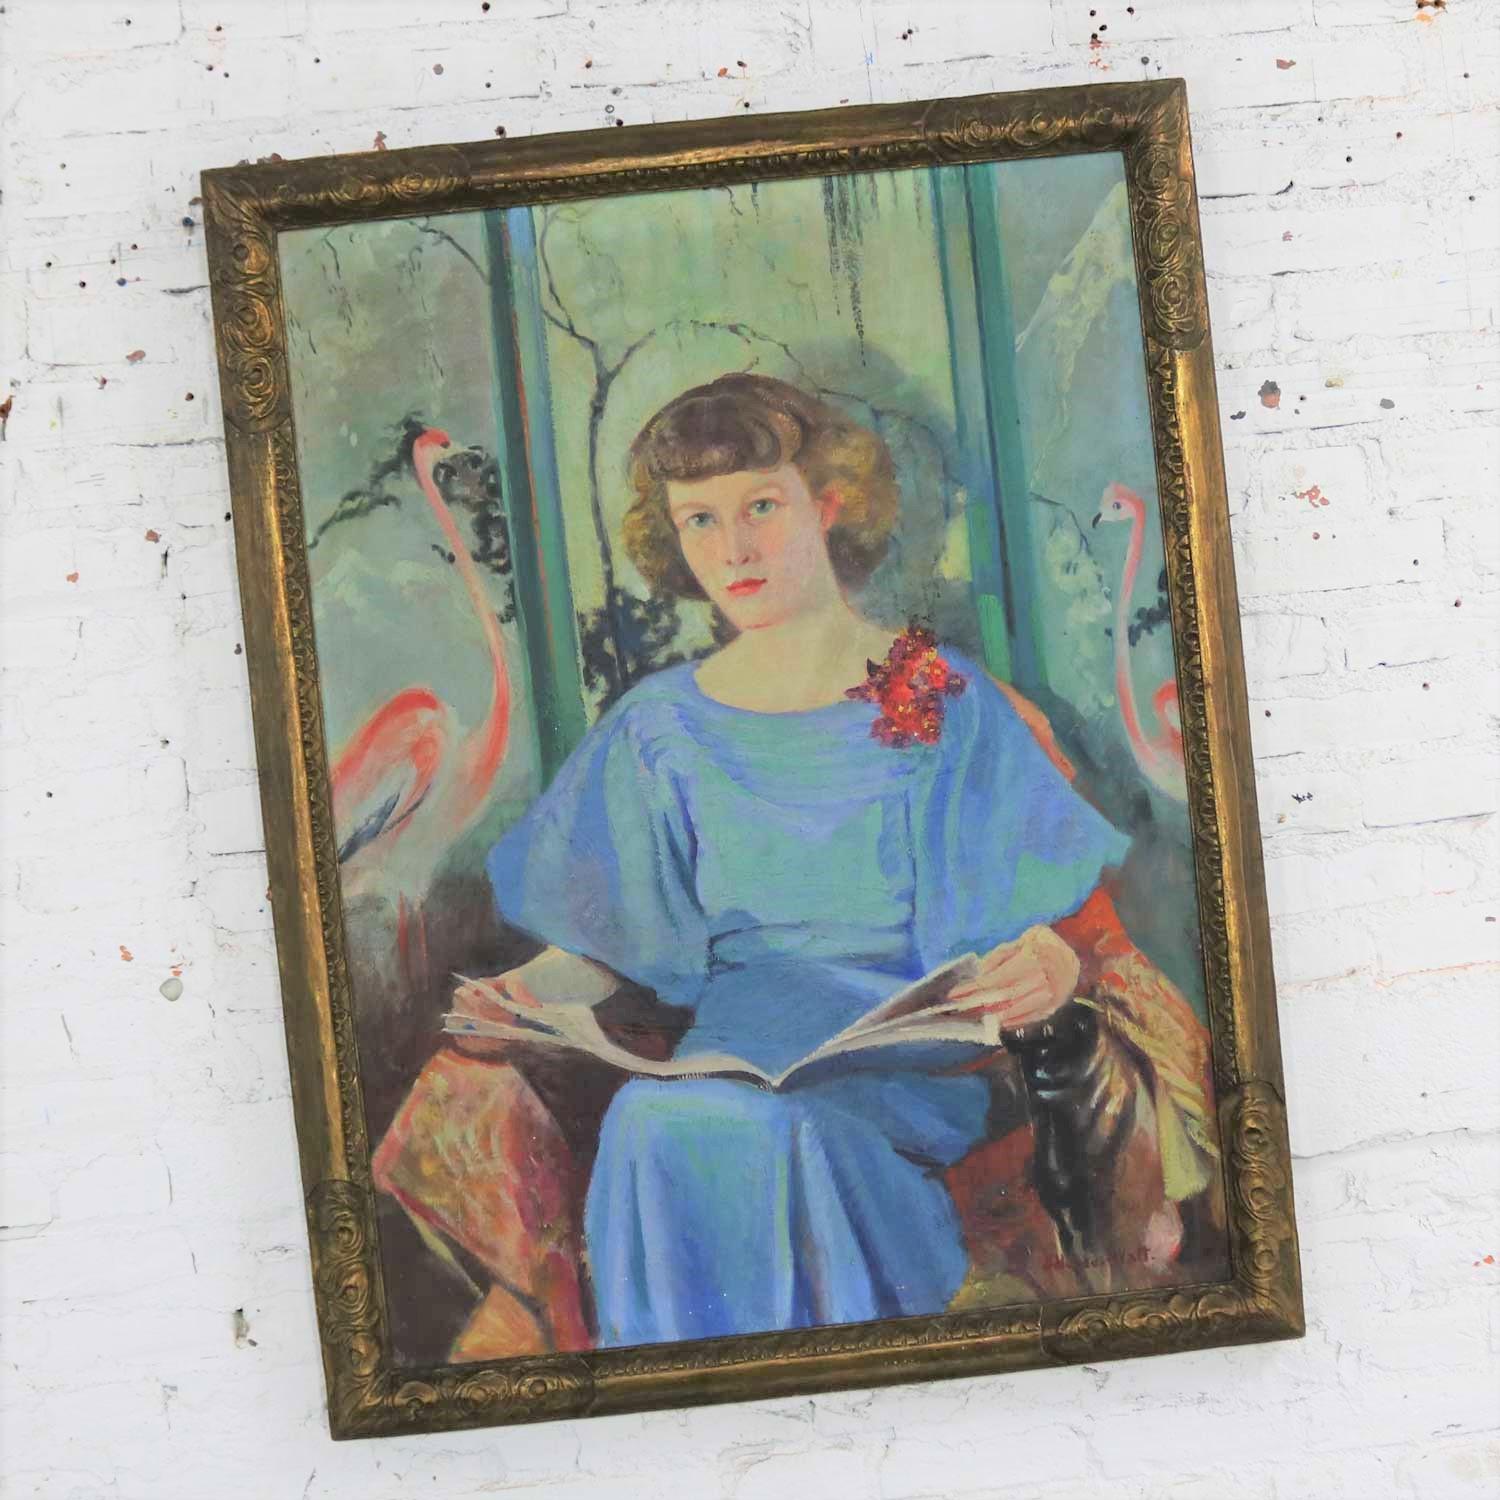 Magnificent vintage and large oil portrait titled Betsy by Barbara Hunter Watt signed and dated 1936. It is in its original gilded frame and wonderful original condition, circa 1936.

Not only is this portrait fabulous but it has an interesting